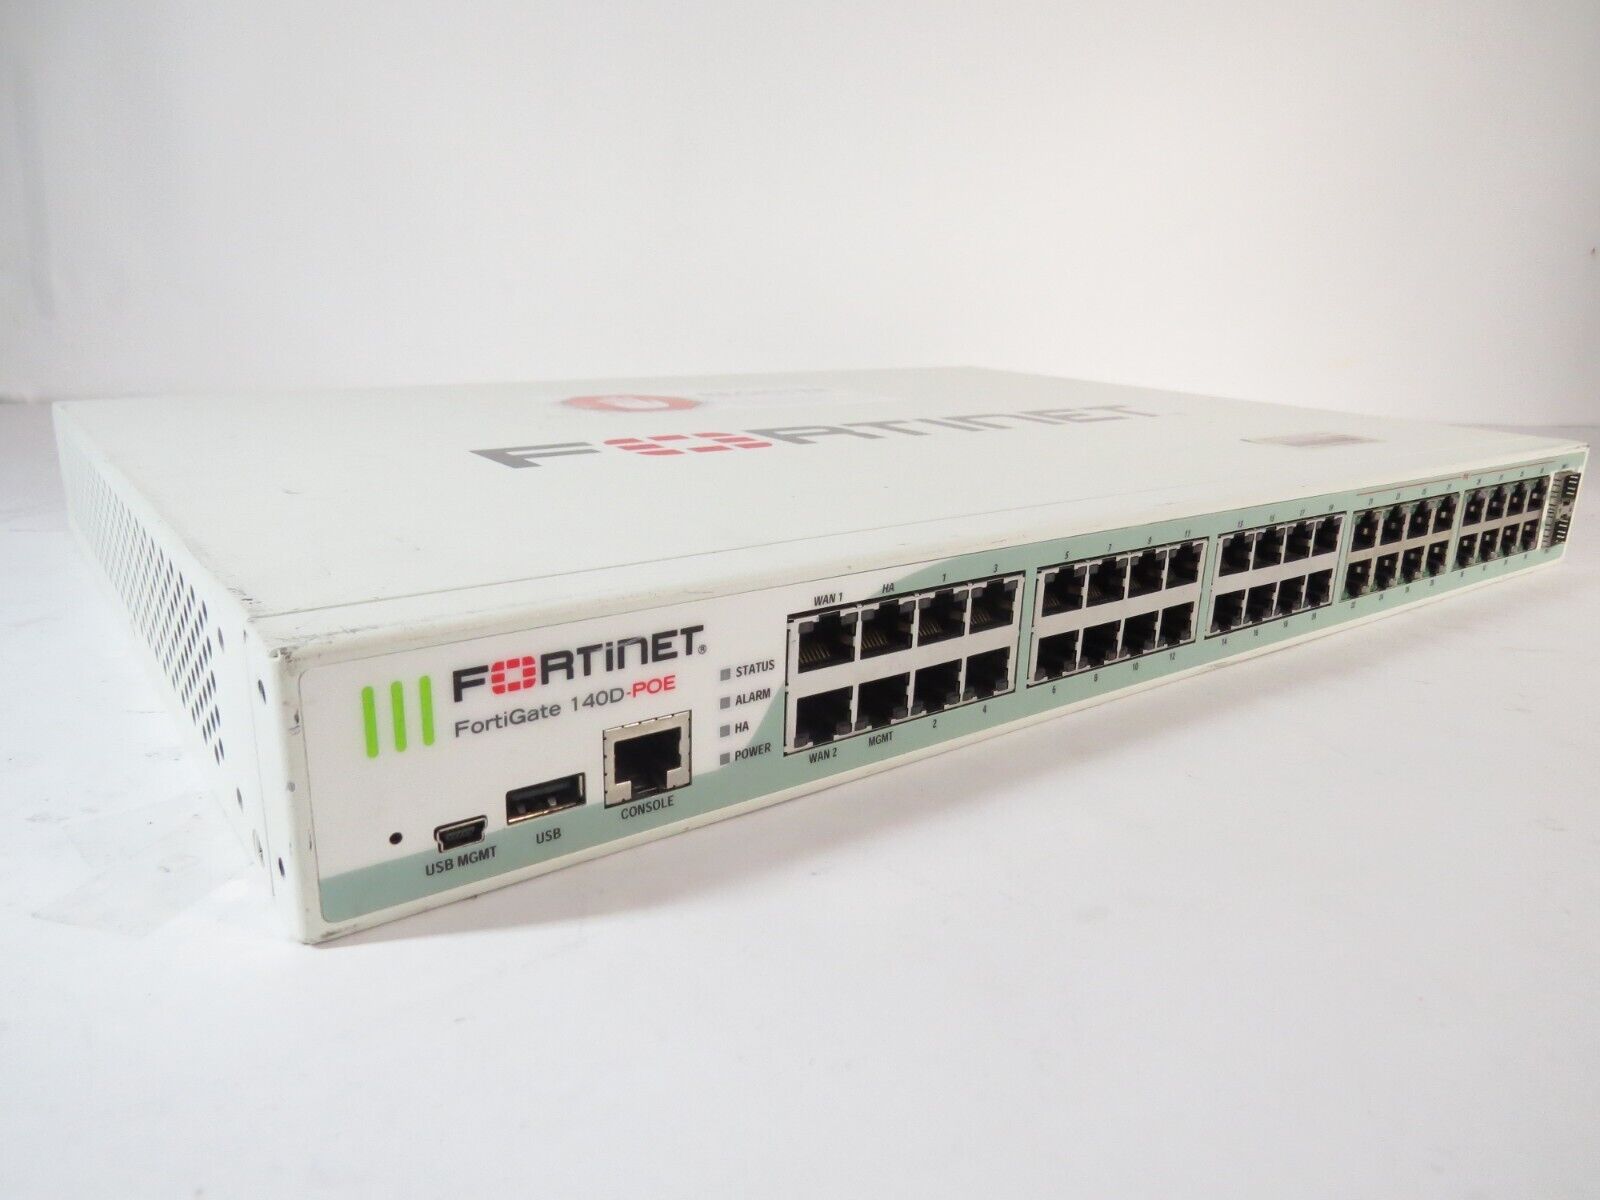 FORTINET FG-140D-POE 40 PORT FORTIGATE FIREWALL SECURITY APPLIANCE